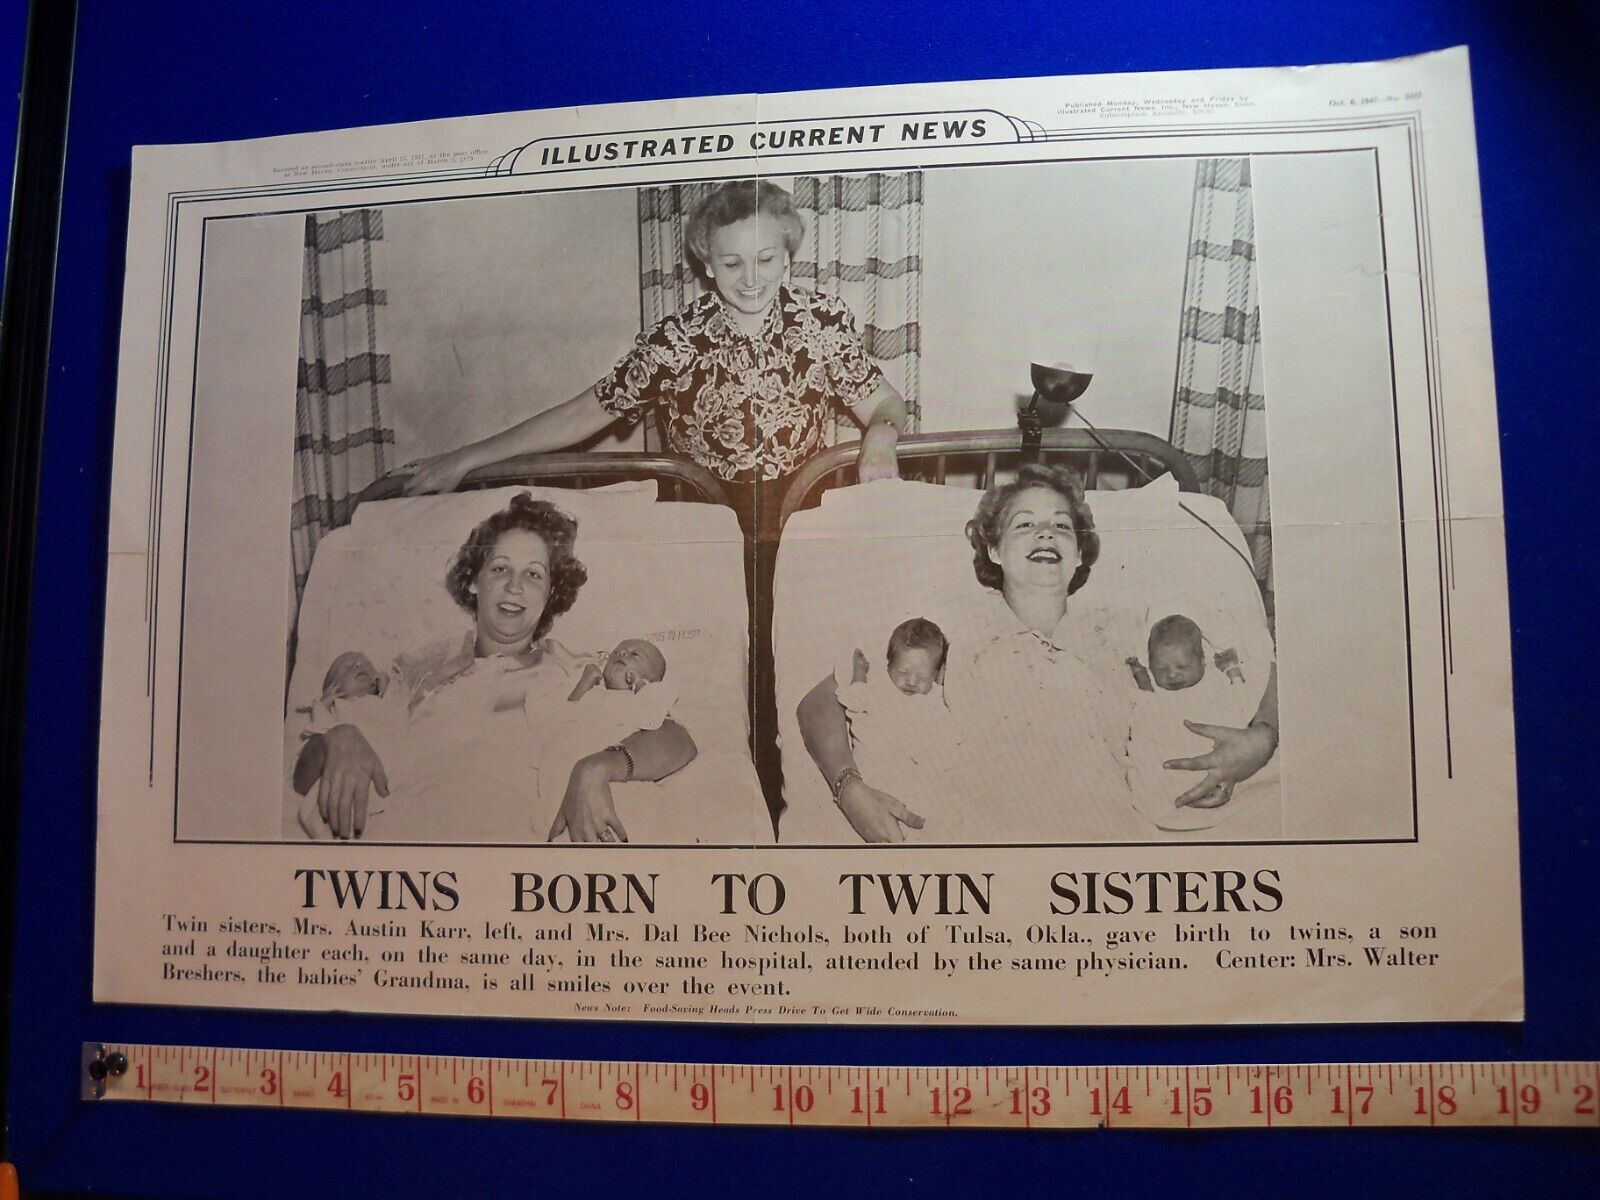 1947 Illustrated Current News Photo History Twins born to TWIN Sisters TULSA OK